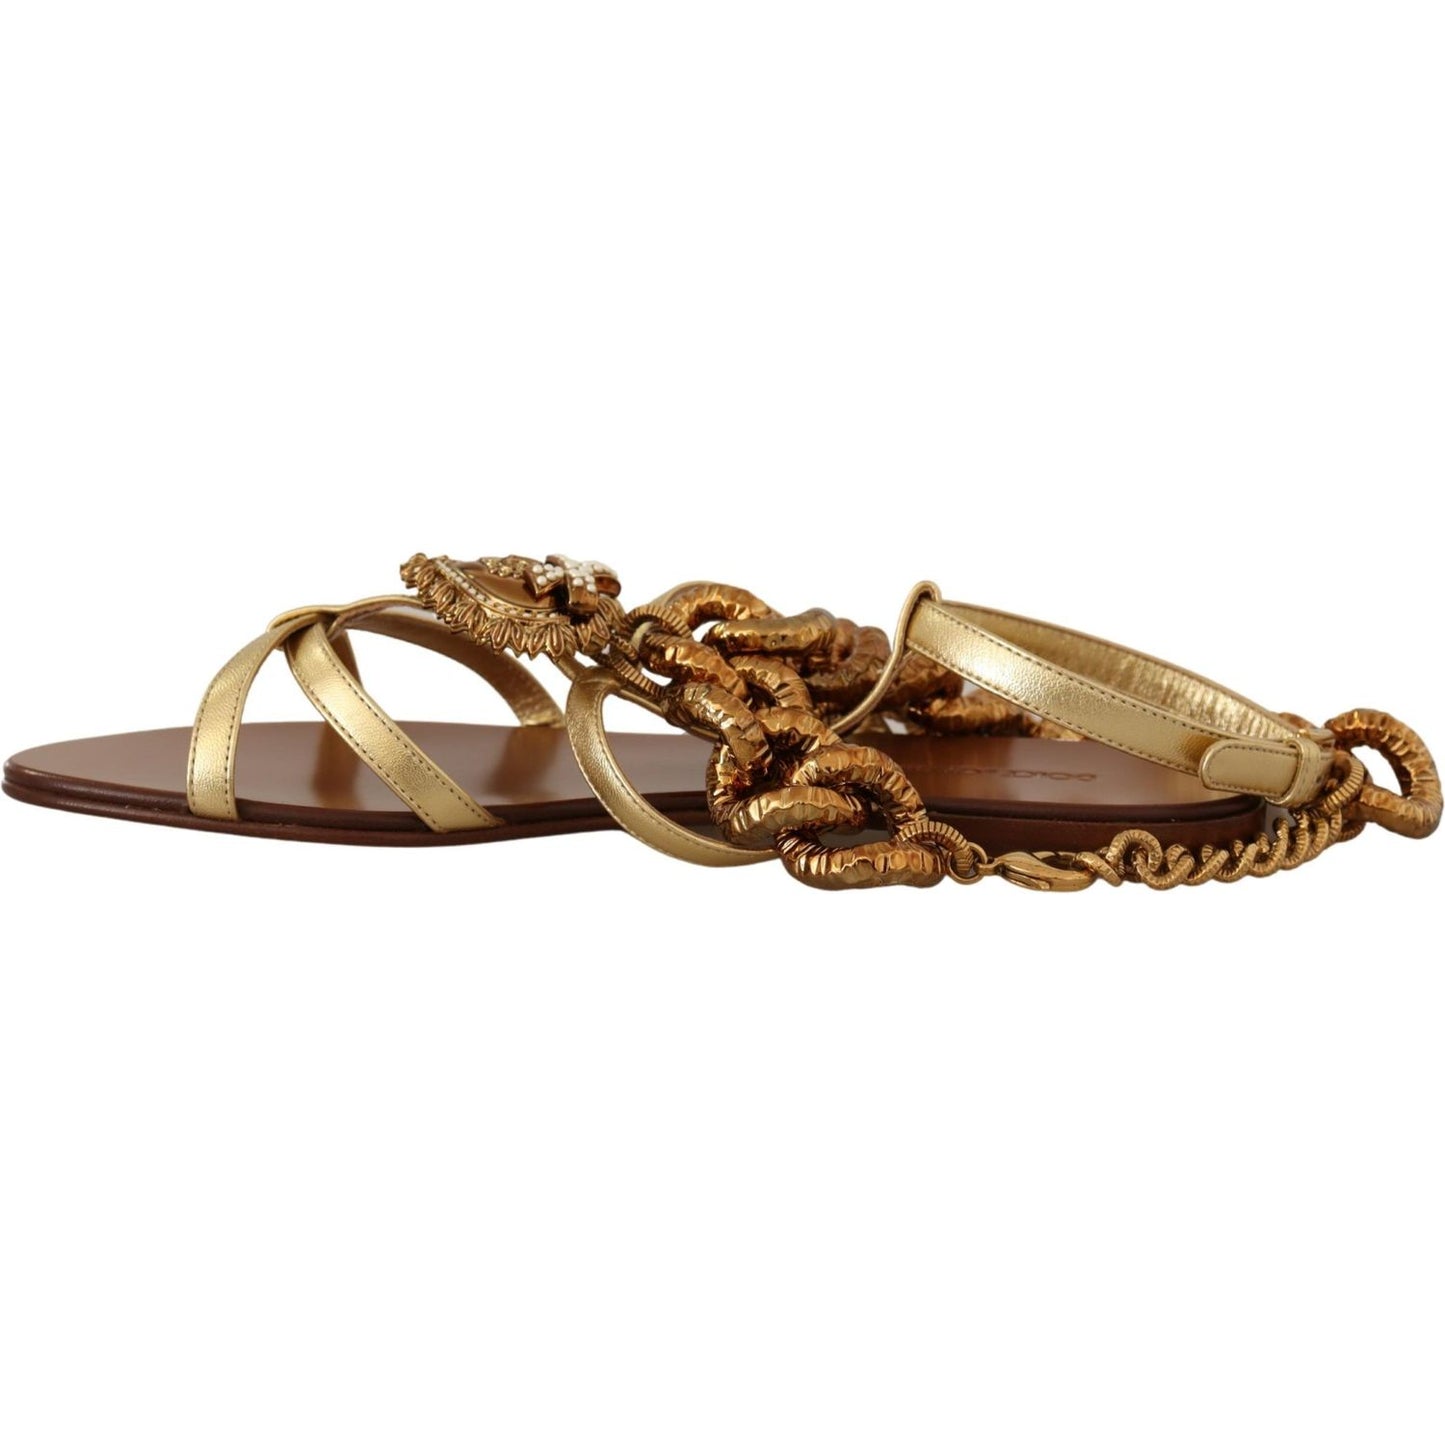 Dolce & Gabbana Chic Gladiator Flats with Heart and Chain Accents gold-leather-devotion-flats-sandals IMG_0198-scaled-ca304ea7-295.jpg